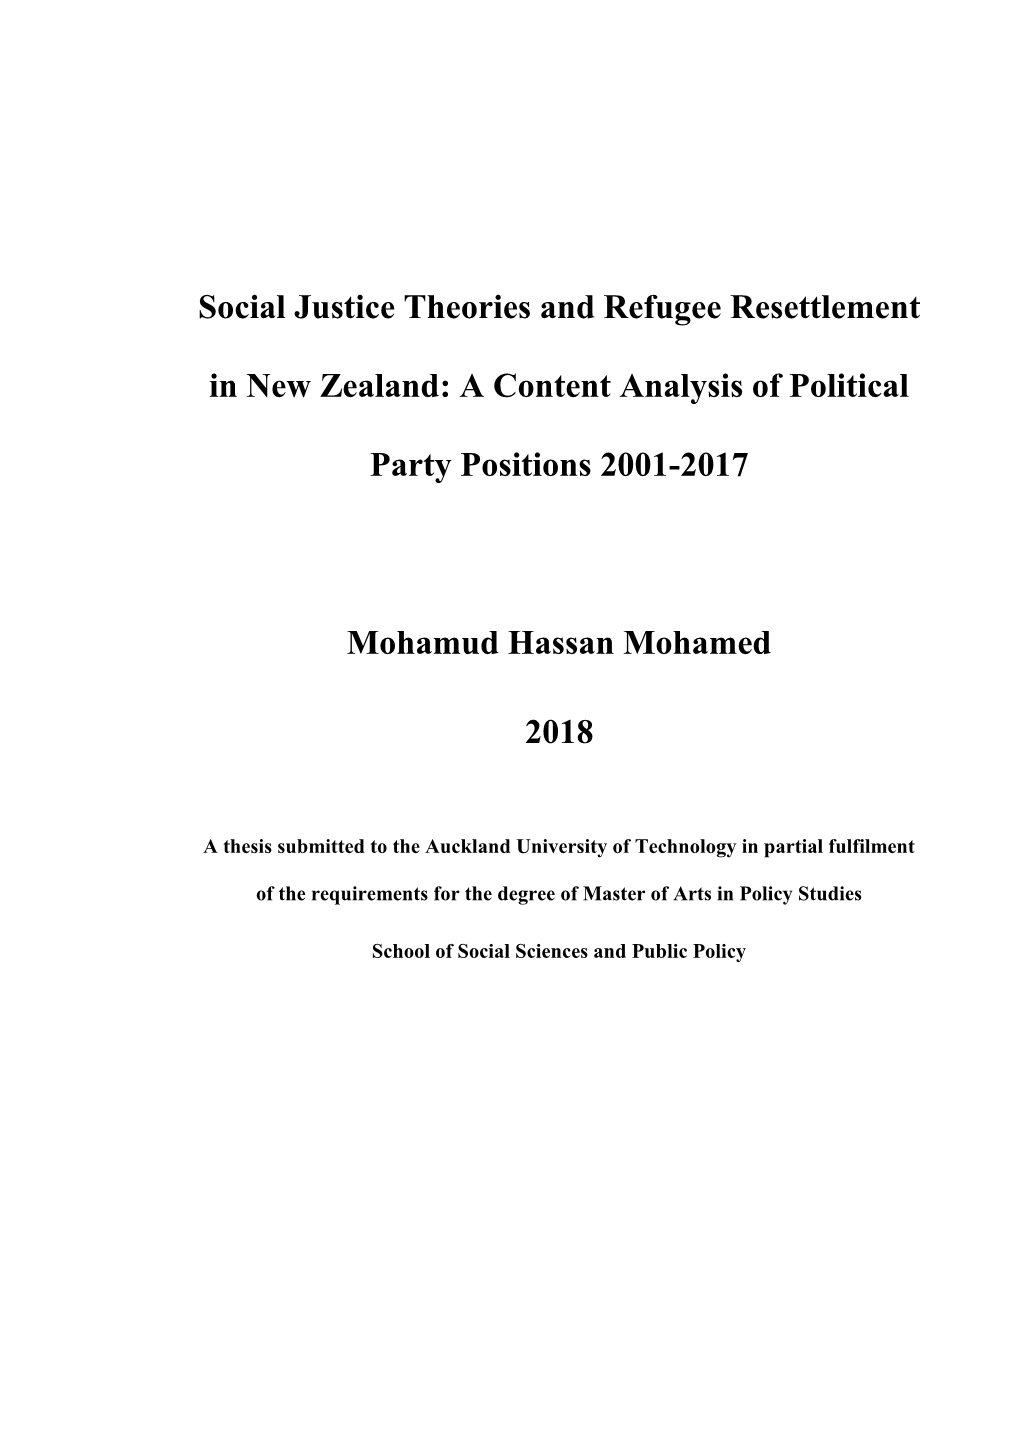 Social Justice Theories and Refugee Resettlement in New Zealand: A